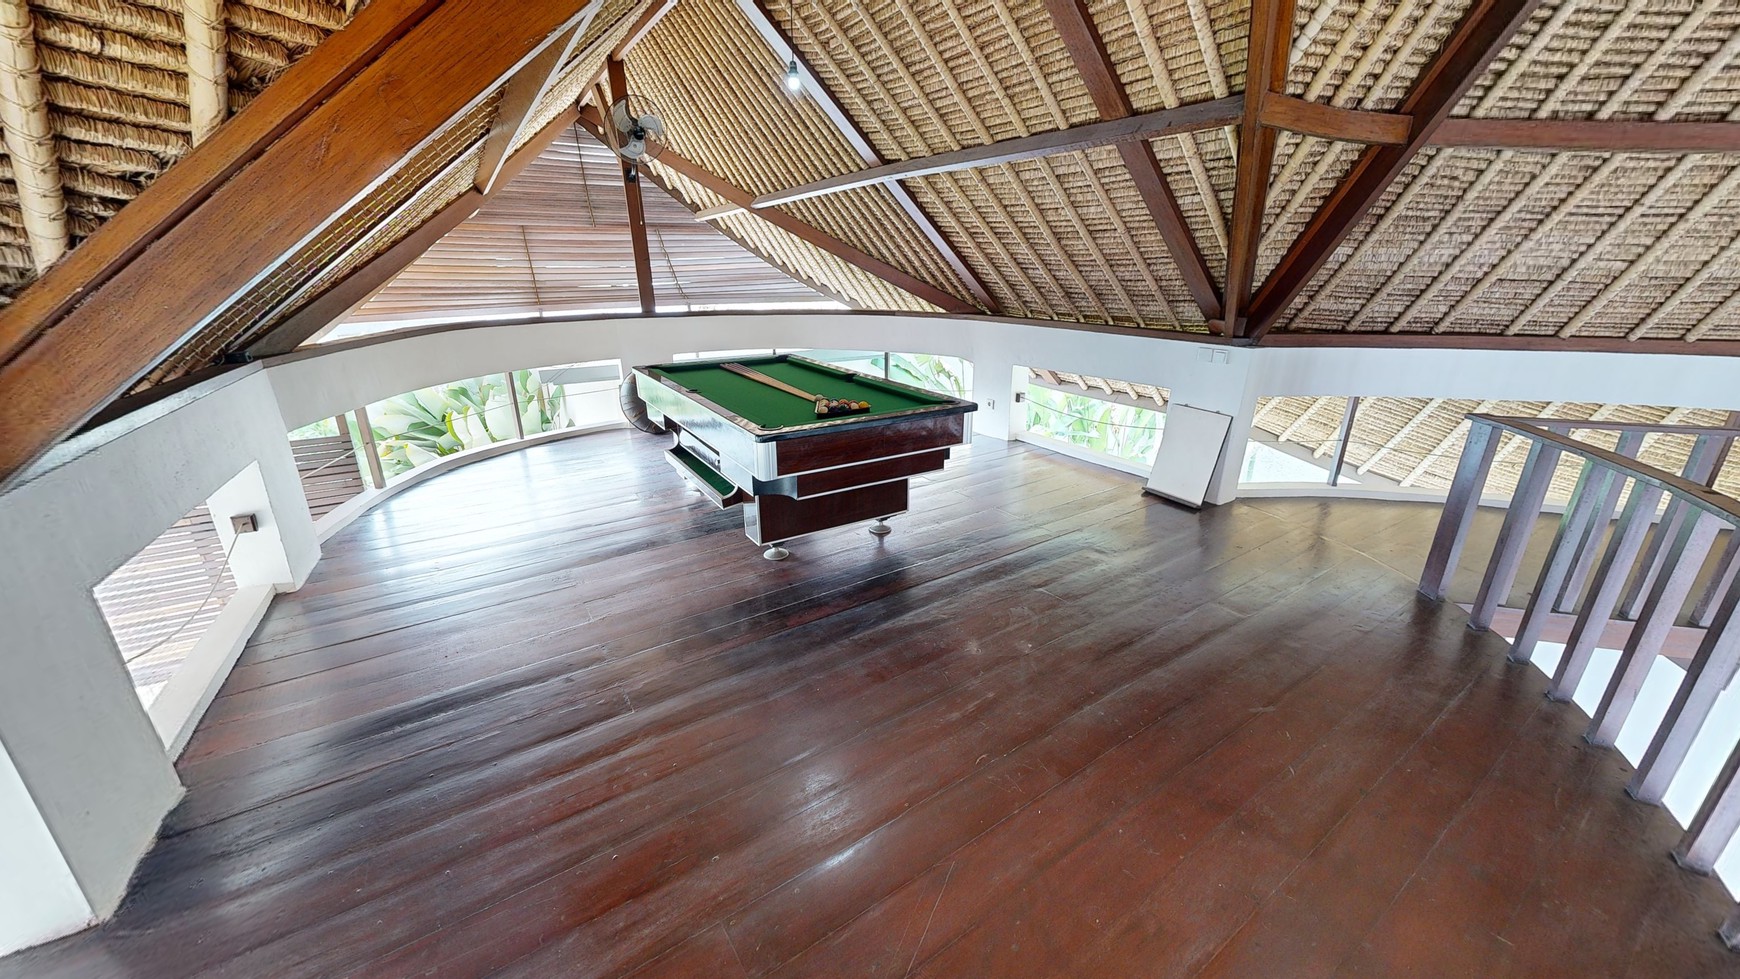 Freehold - Exquisite Oasis Luxurious 6-Bedroom Villa with Pool in Canggu